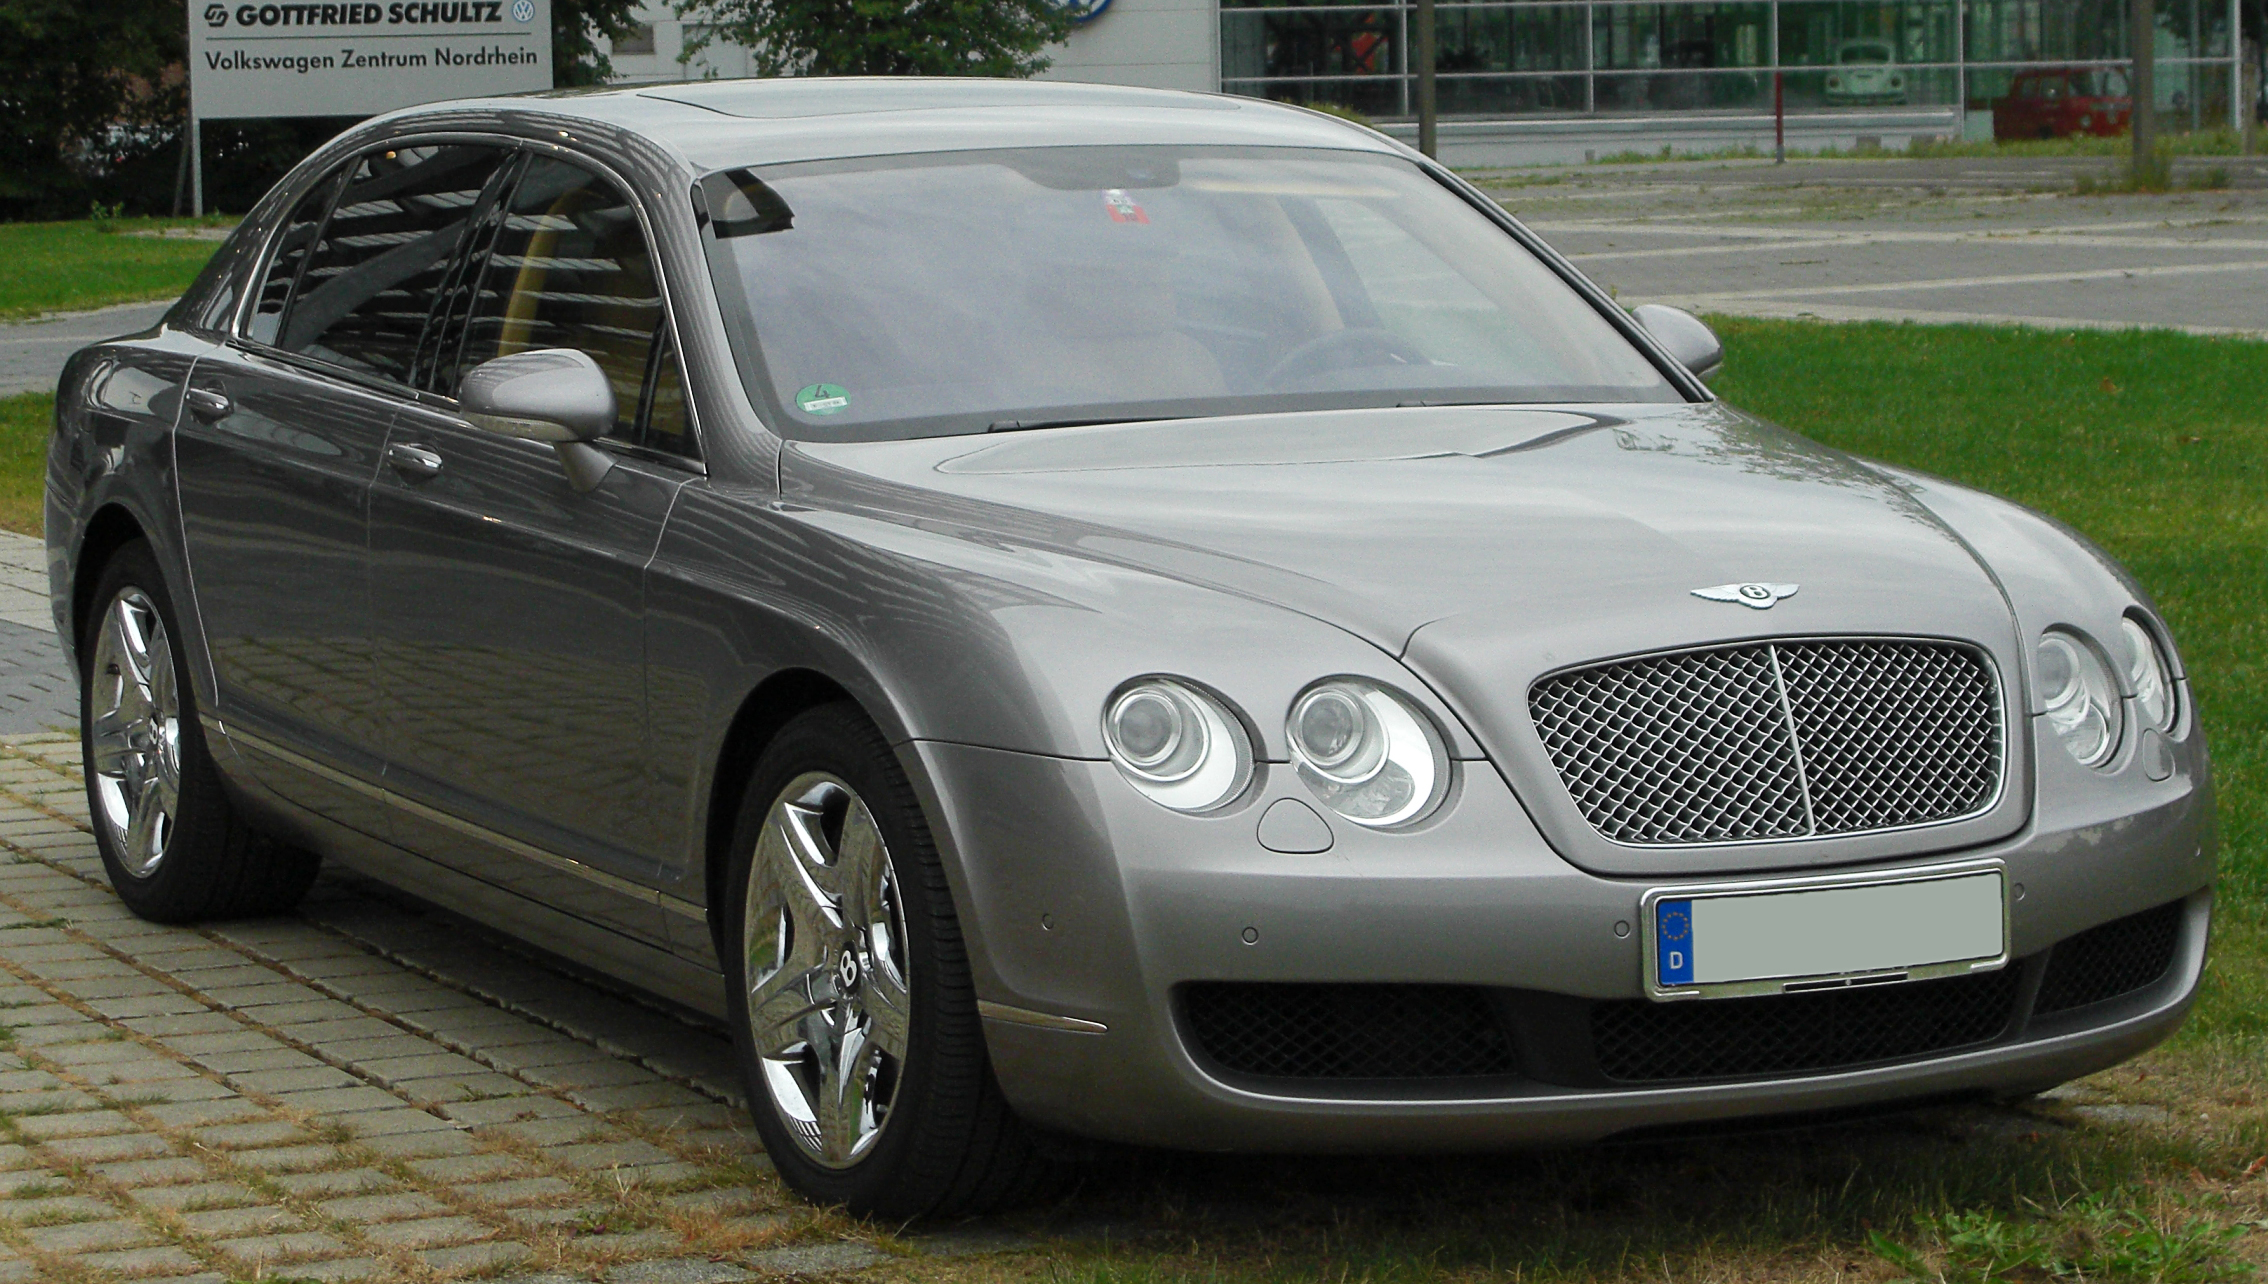 HQ Bentley Continental Flying Spur Wallpapers | File 2269.64Kb